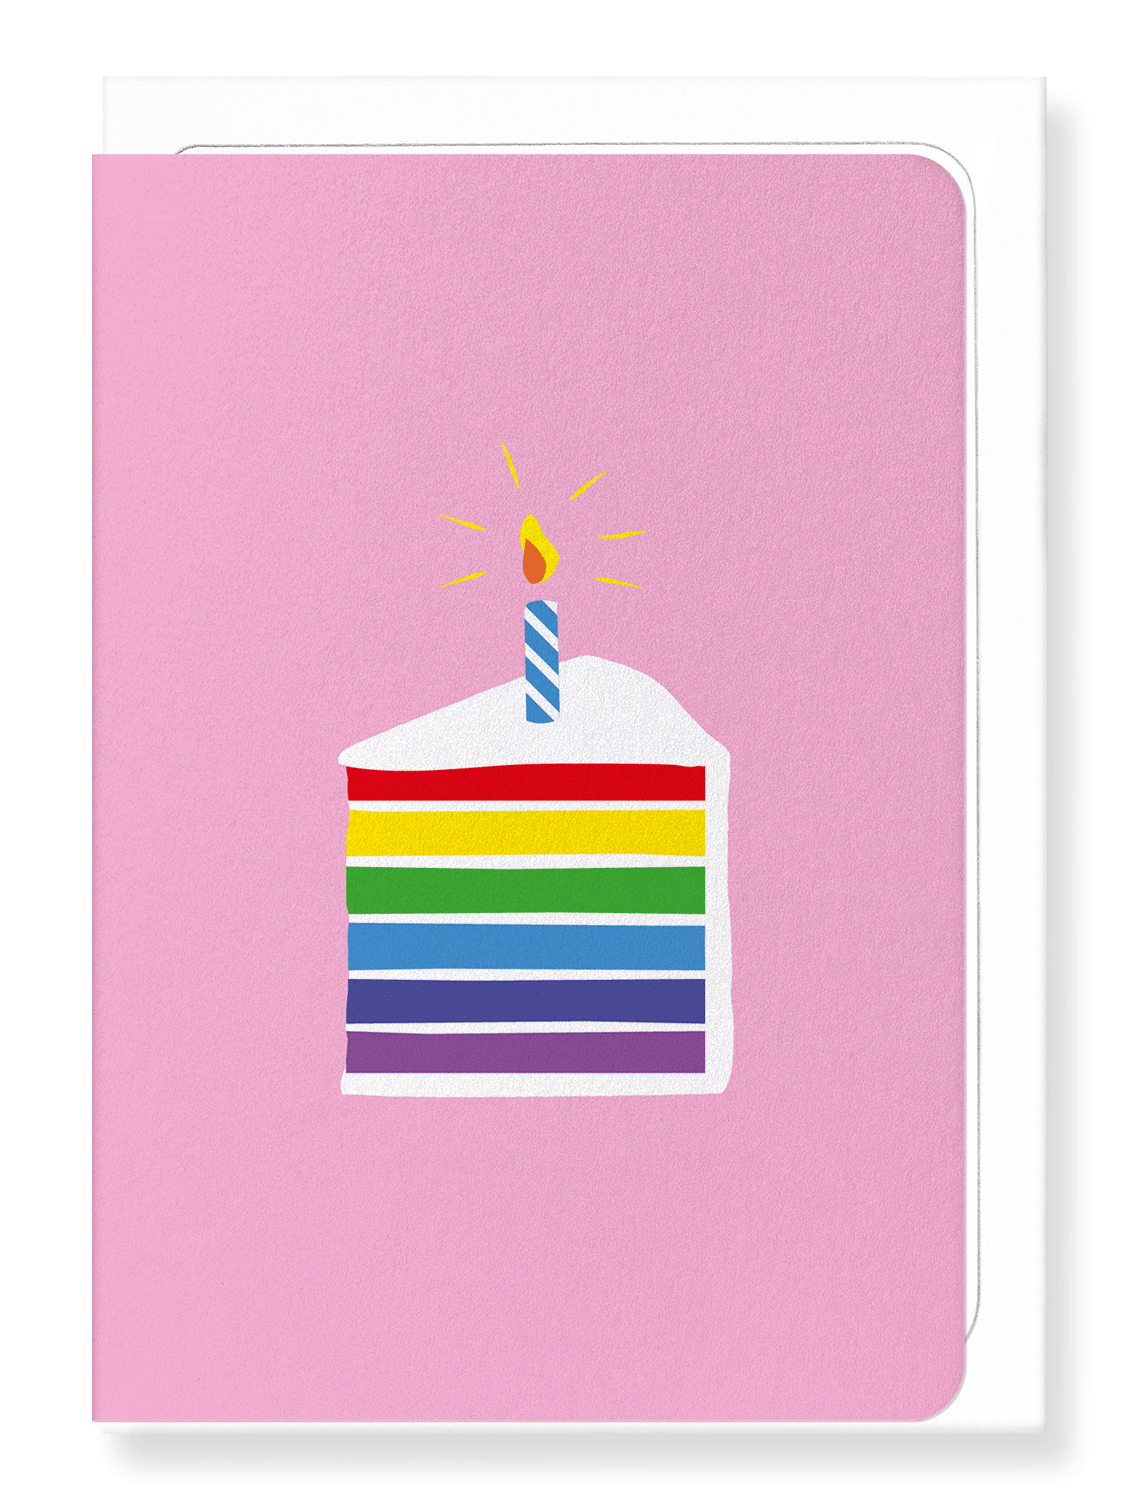 Ezen Designs - Rainbow cake in pink - Greeting Card - Front